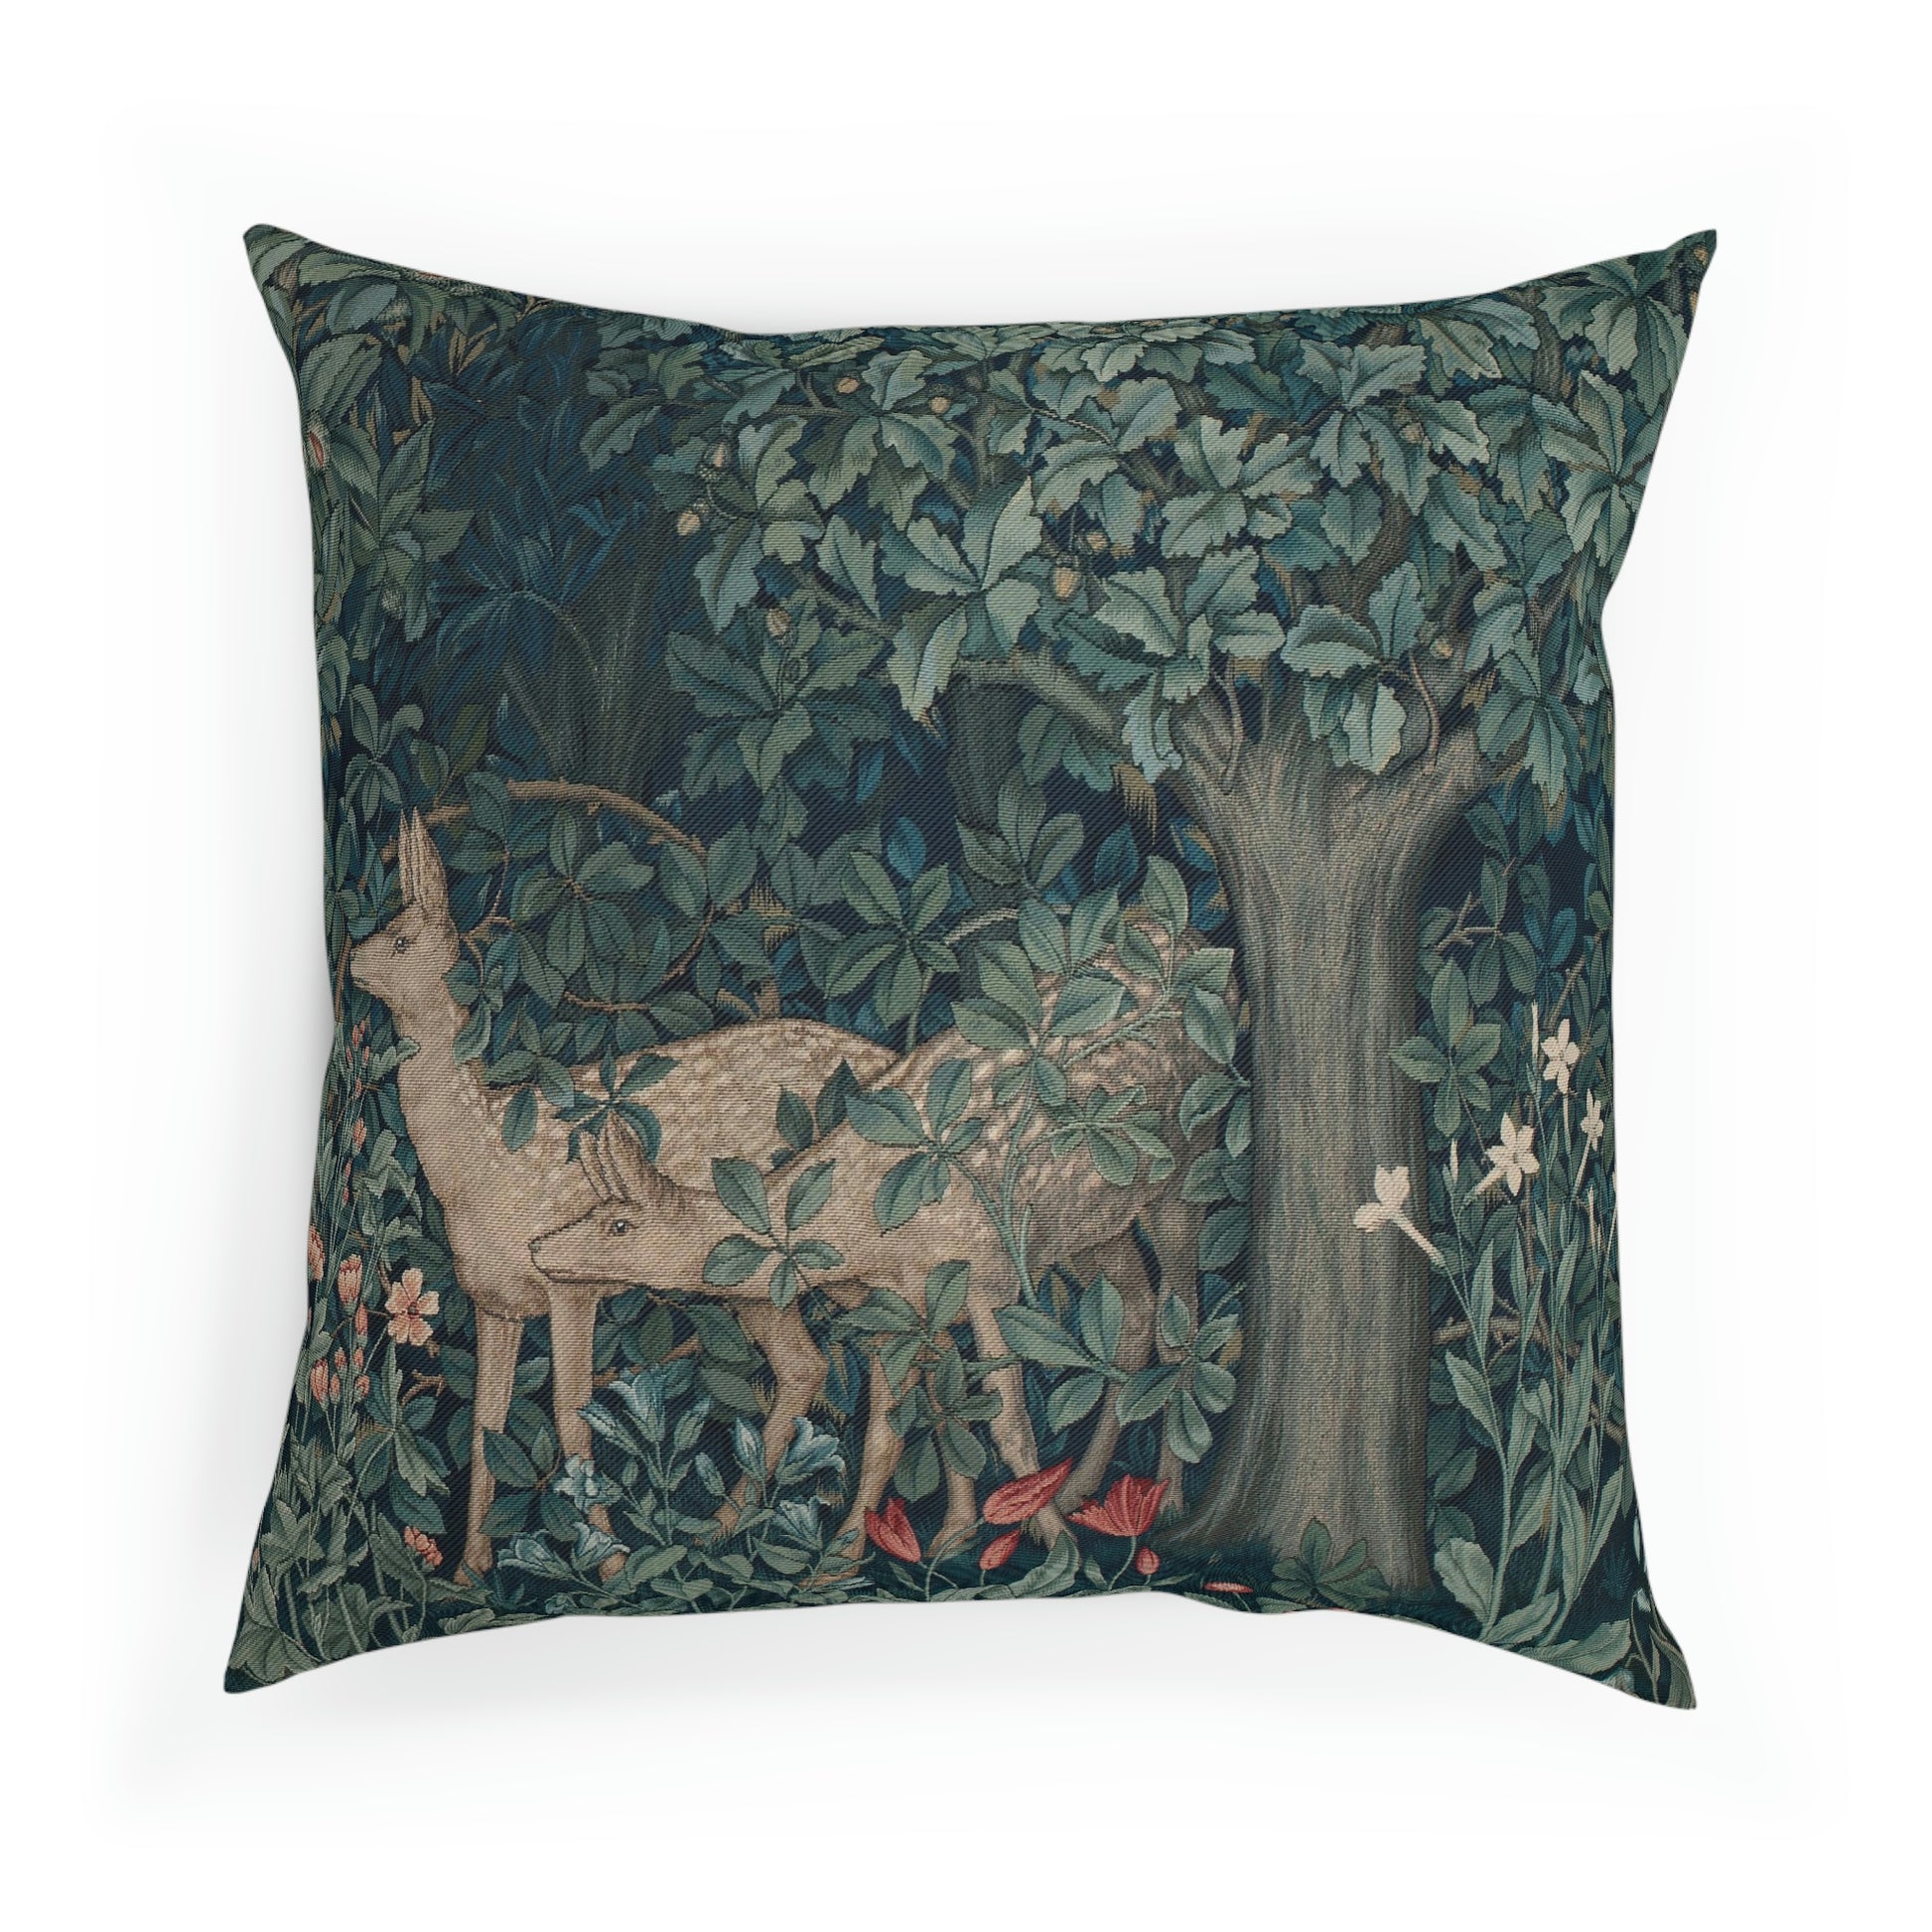 William-Morris-and-Co-Cushion-and-Cushion-Cover-Dear-by-John-Henry-Dearle-Green-Forest-Collection-2